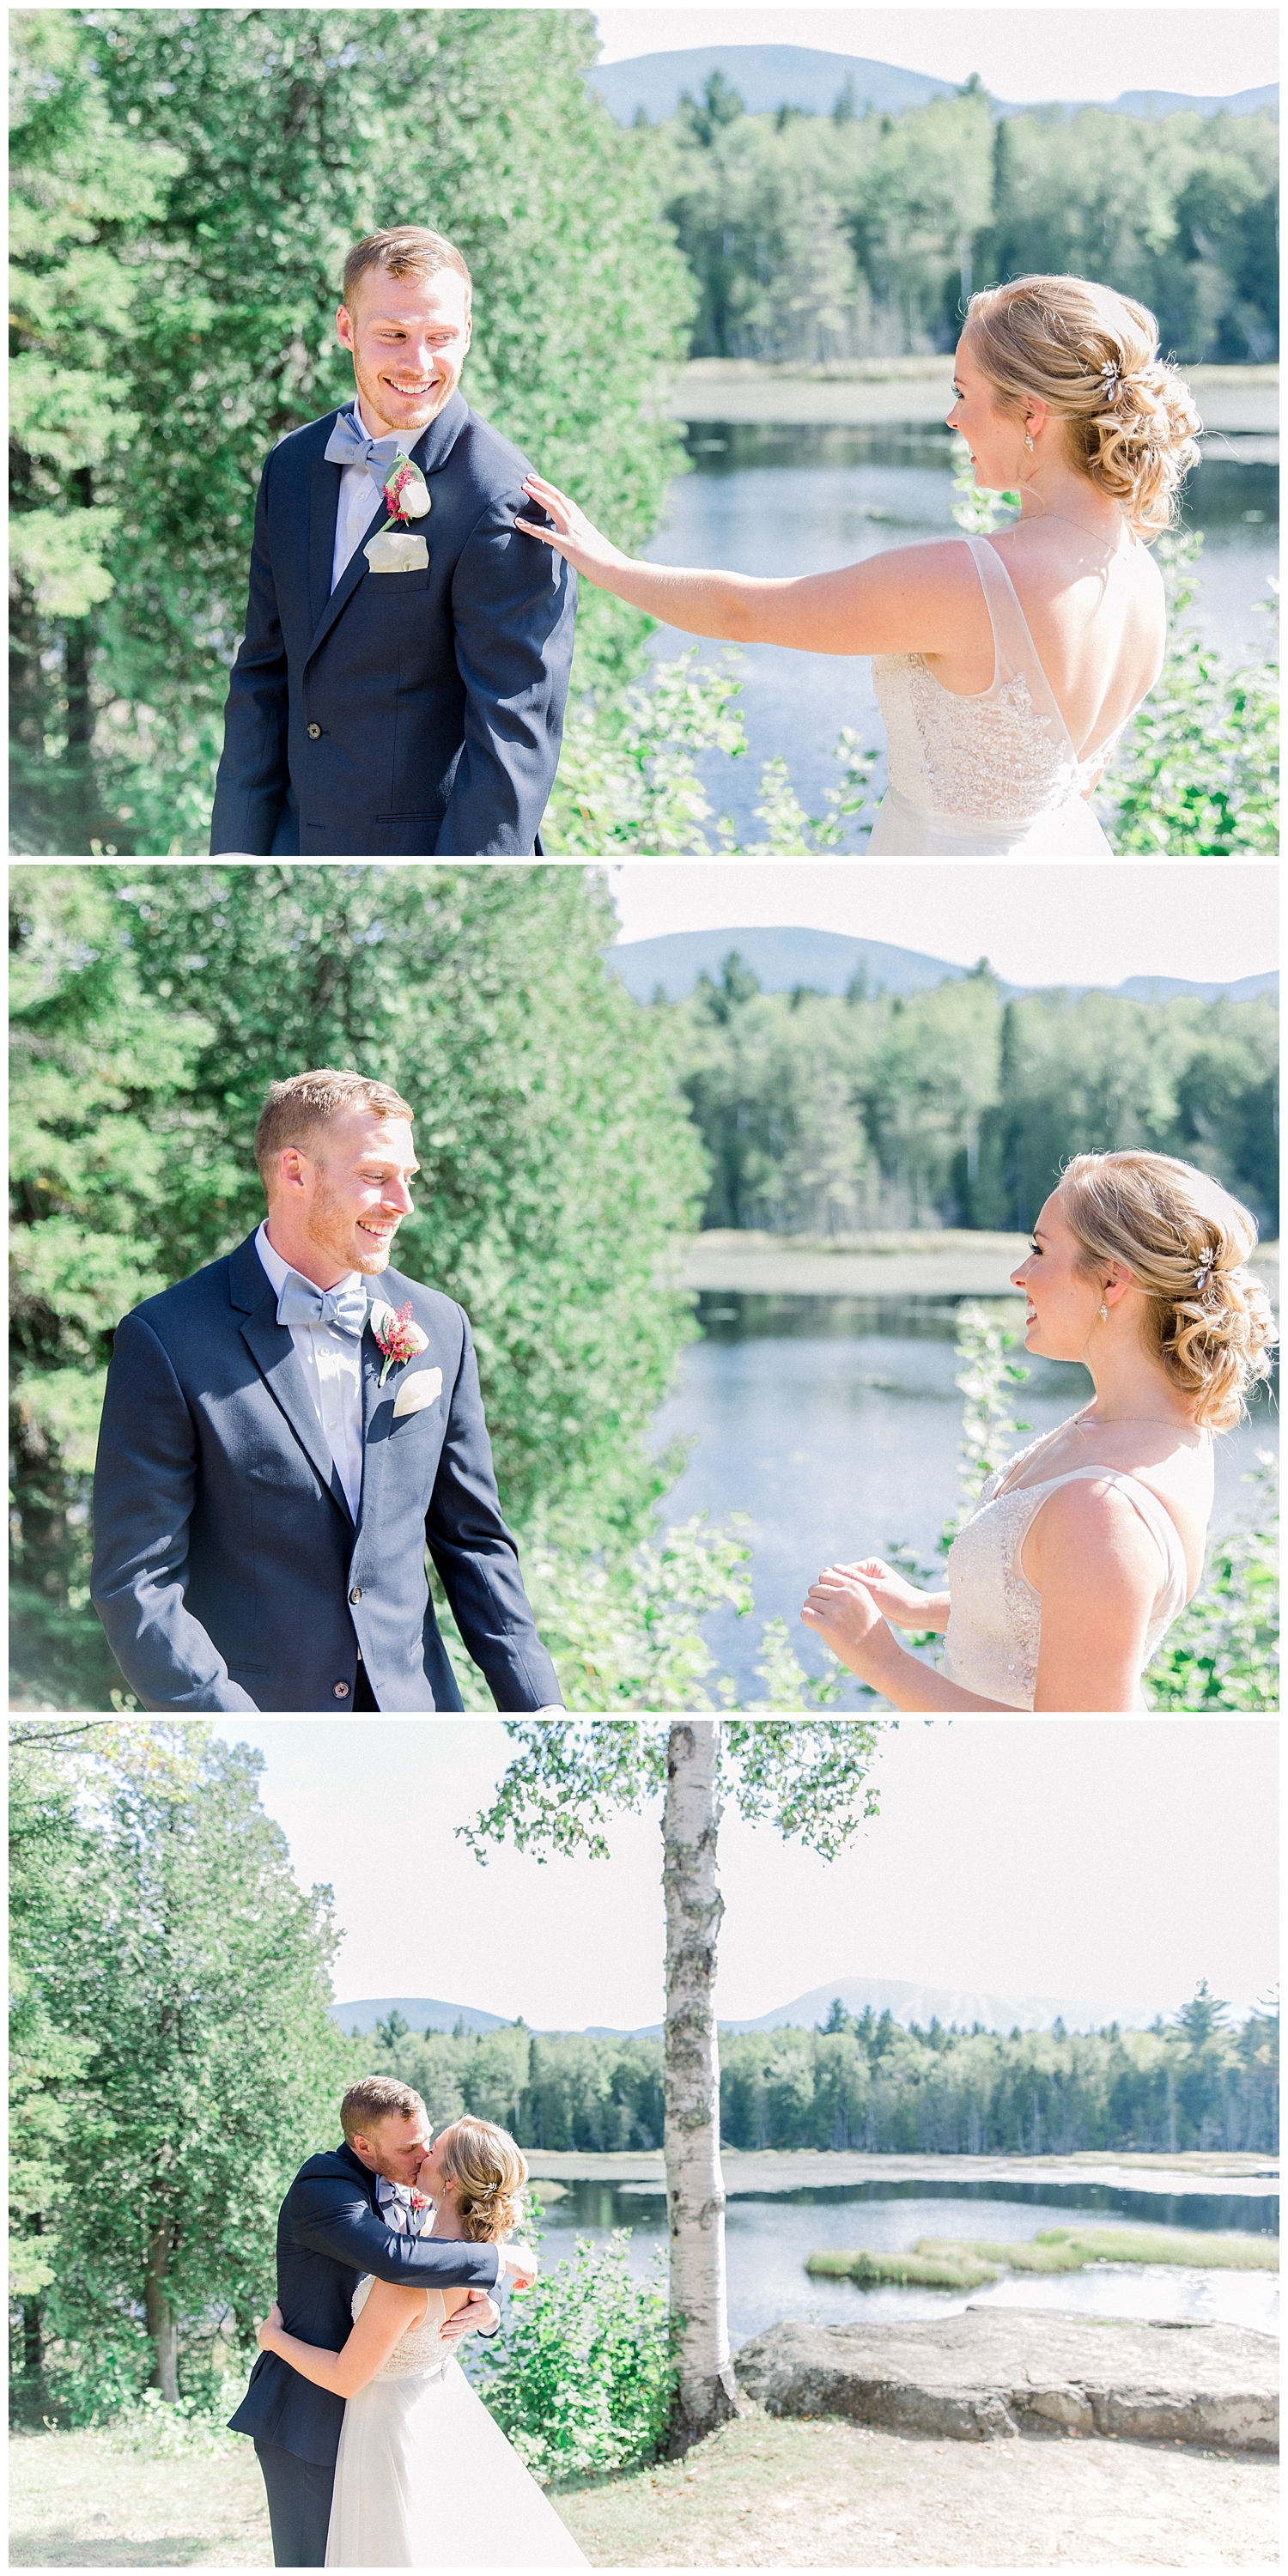 Bride and Groom Portraits after their First Look at a Sugarloaf Mountain Resort Wedding in Maine, photos by Halie Olszowy.